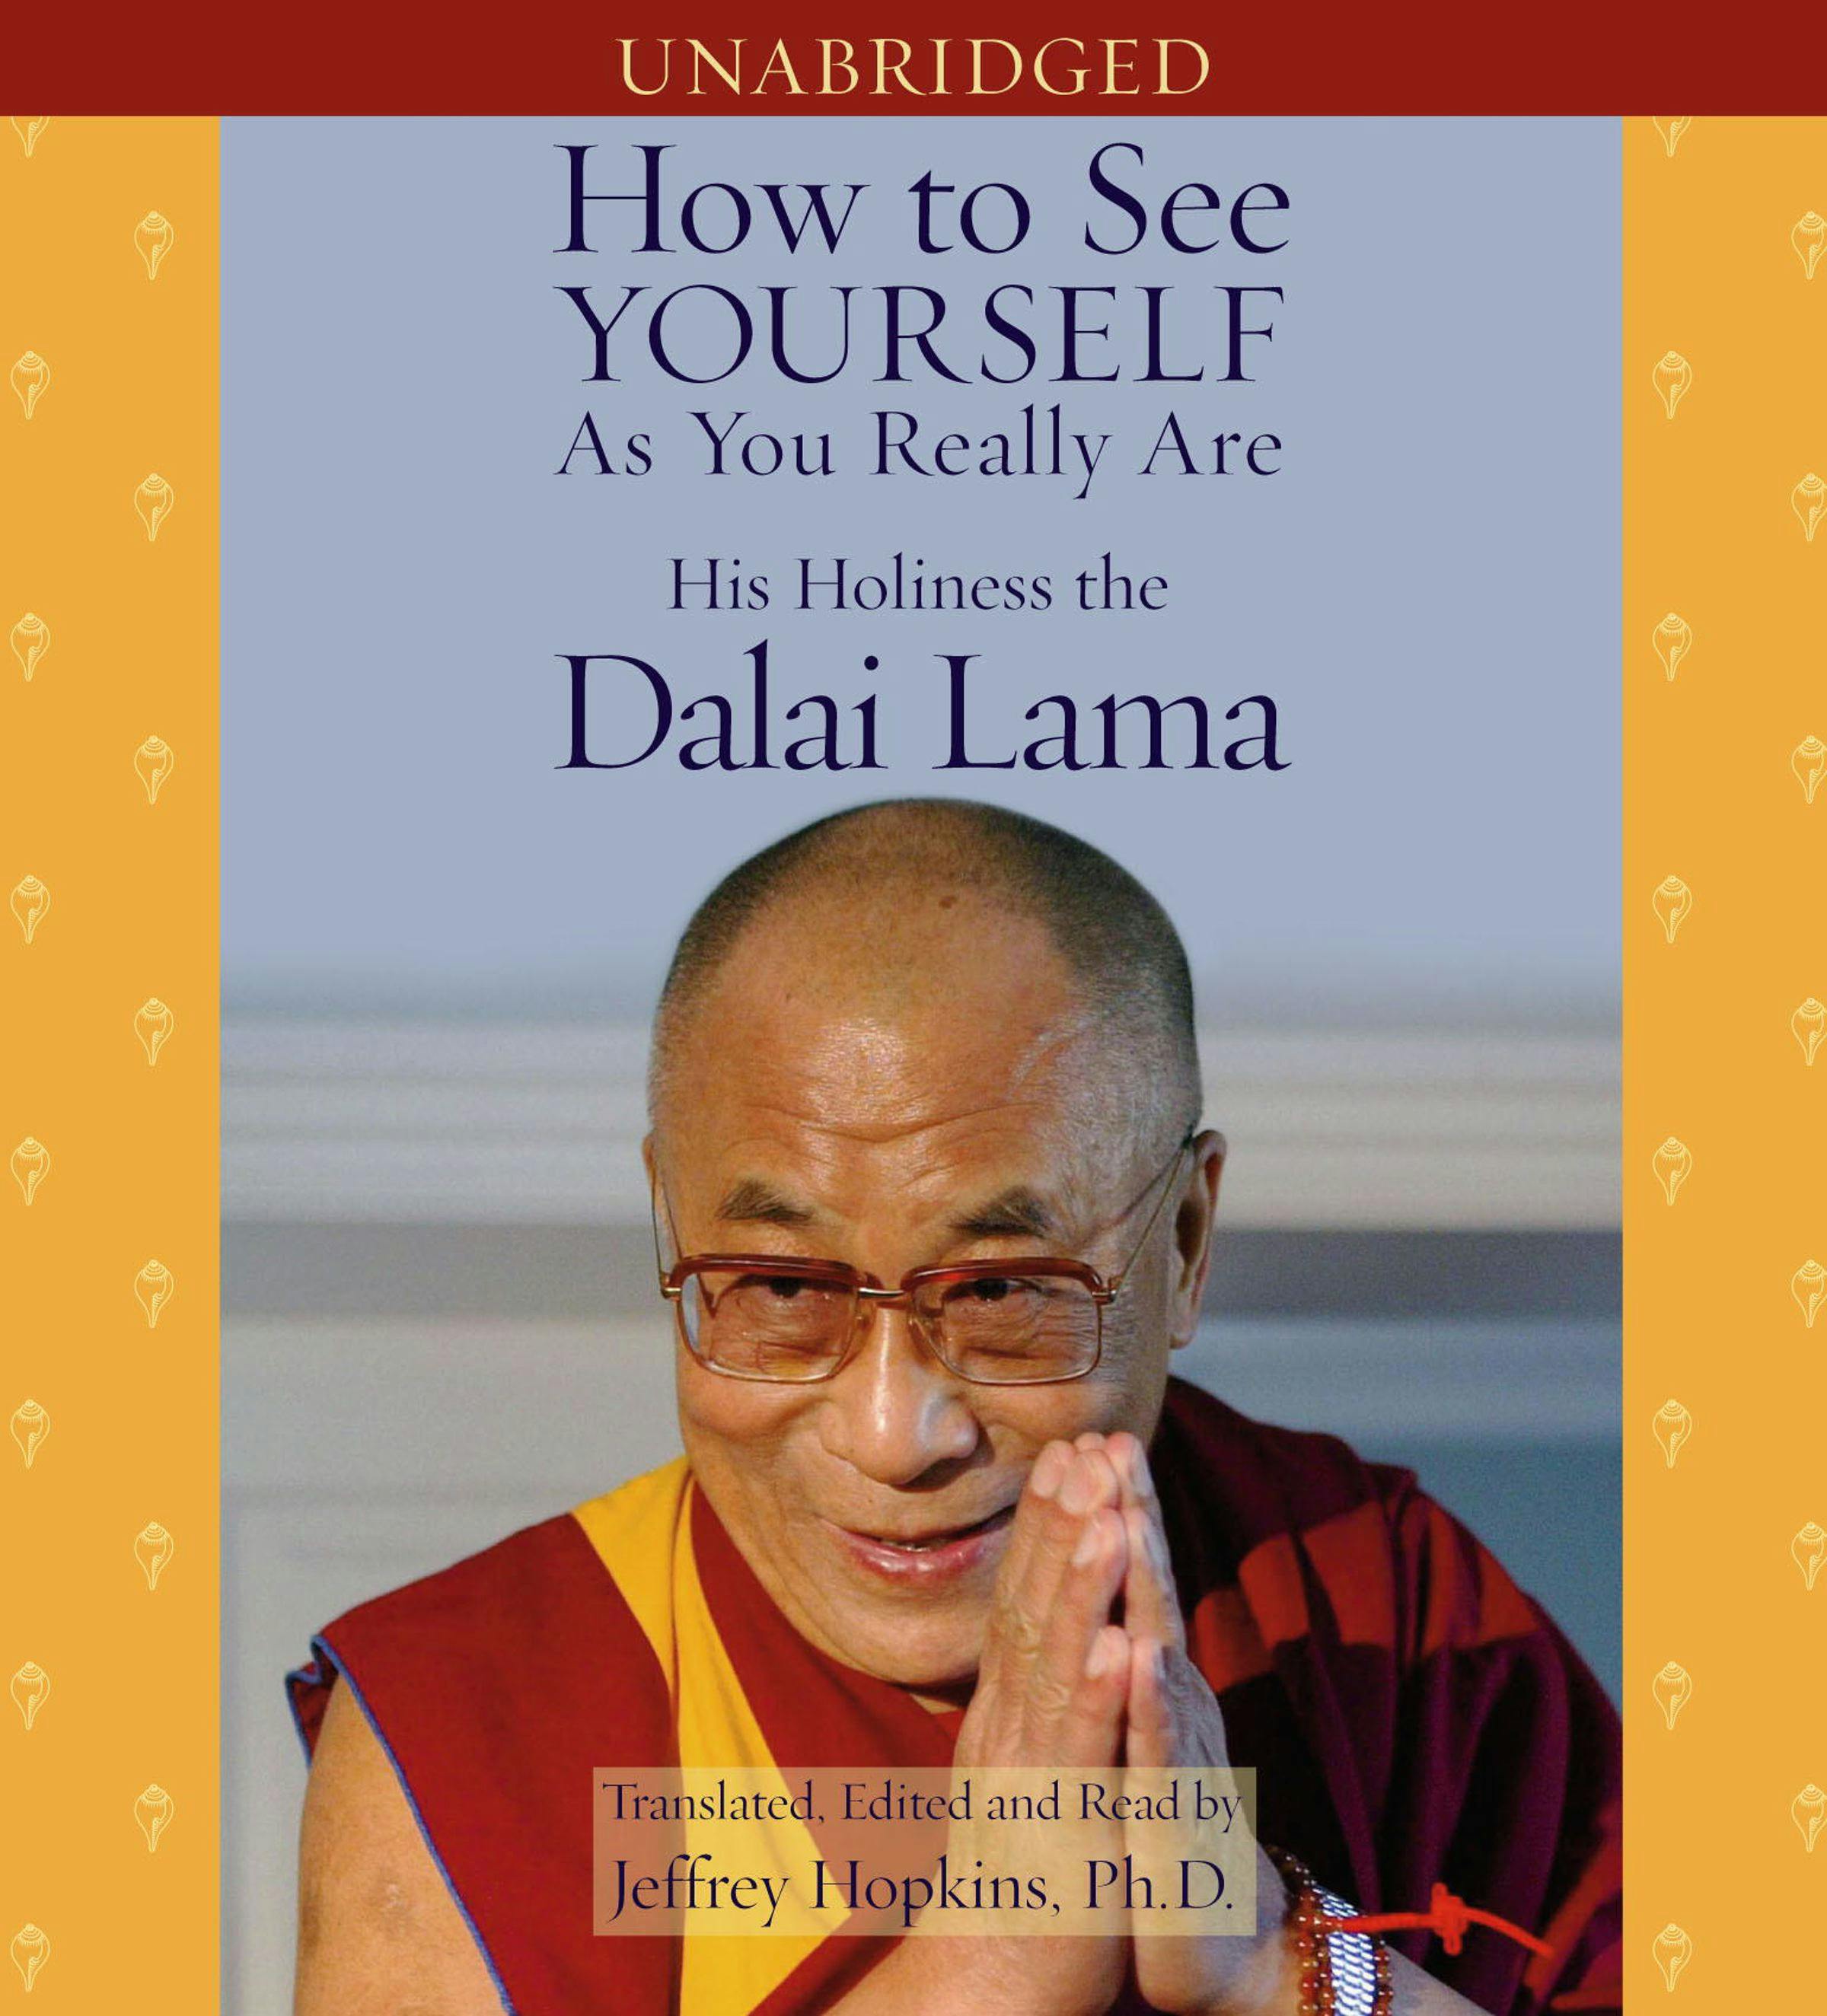 How to See Yourself As You Really Are - His Holiness the Dalai Lama